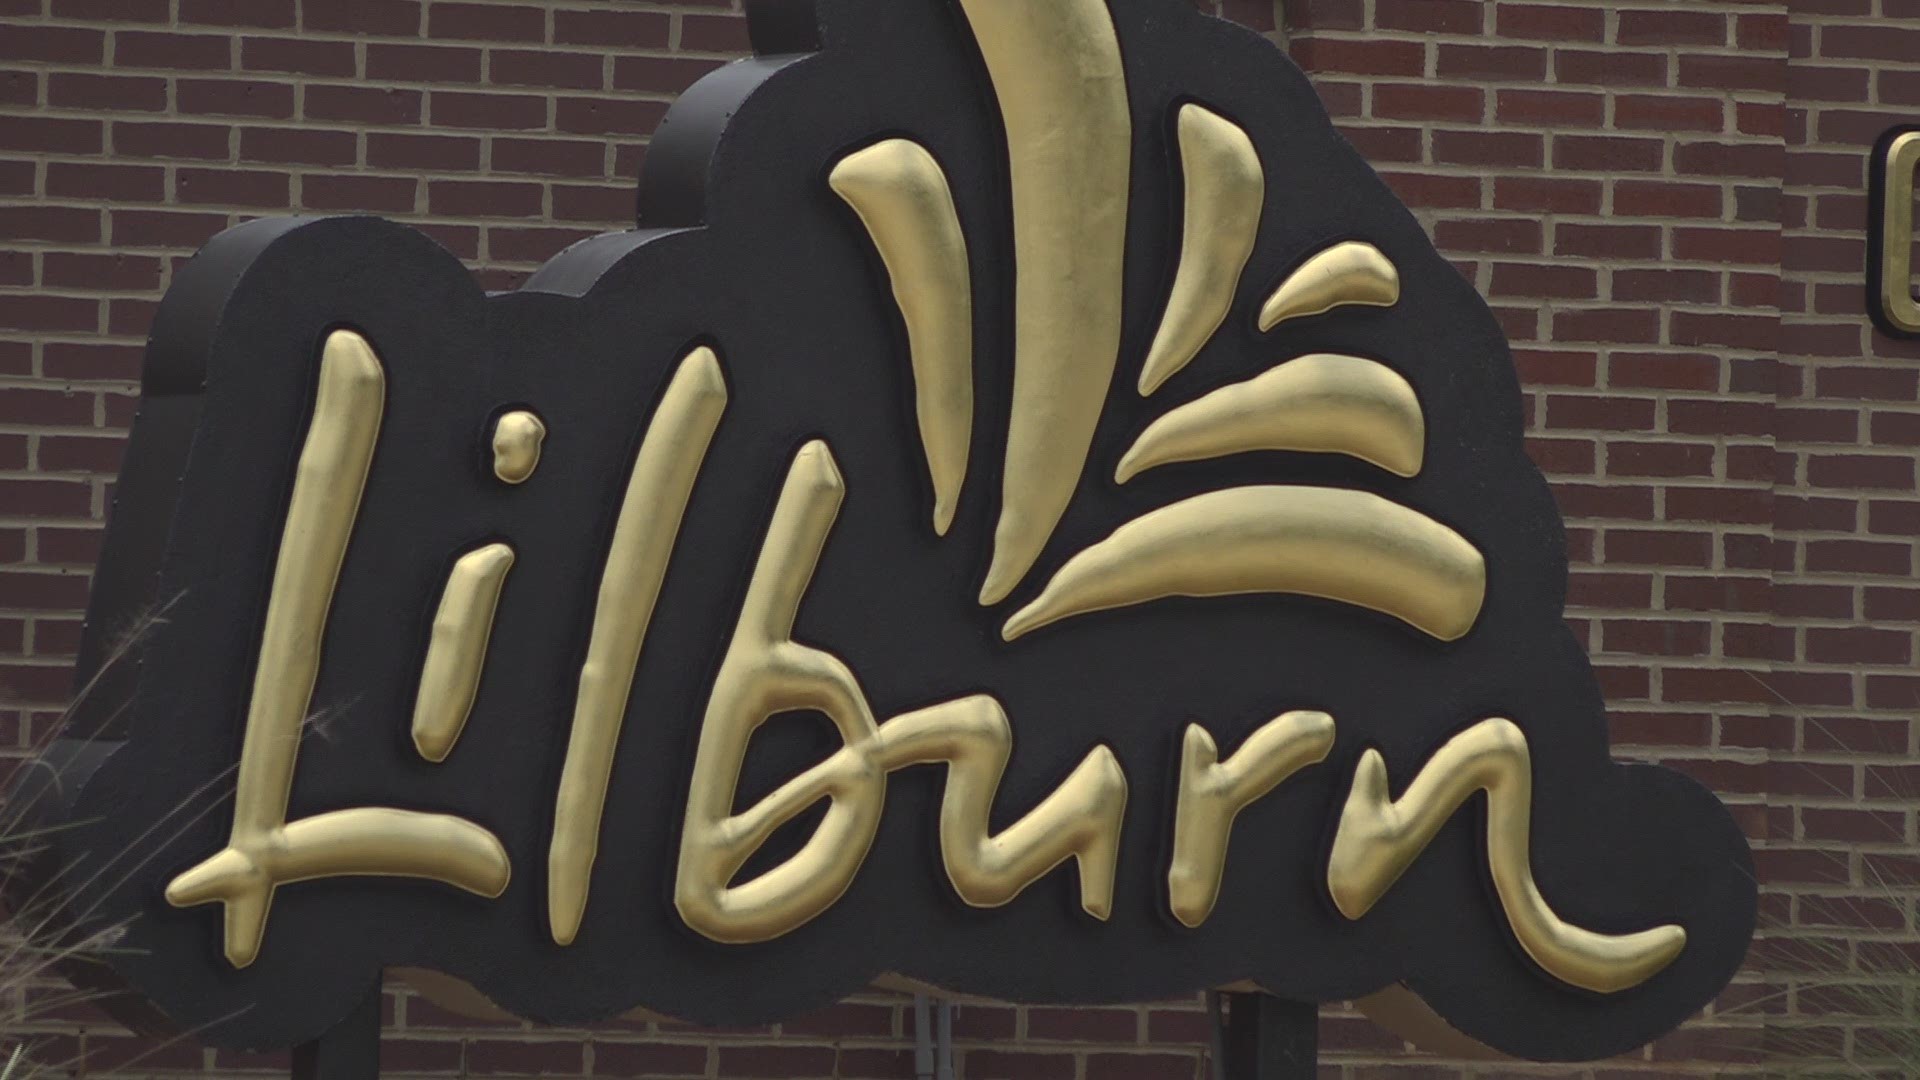 A new ordinance will regulate and ban vape shops in Lilburn city limits.